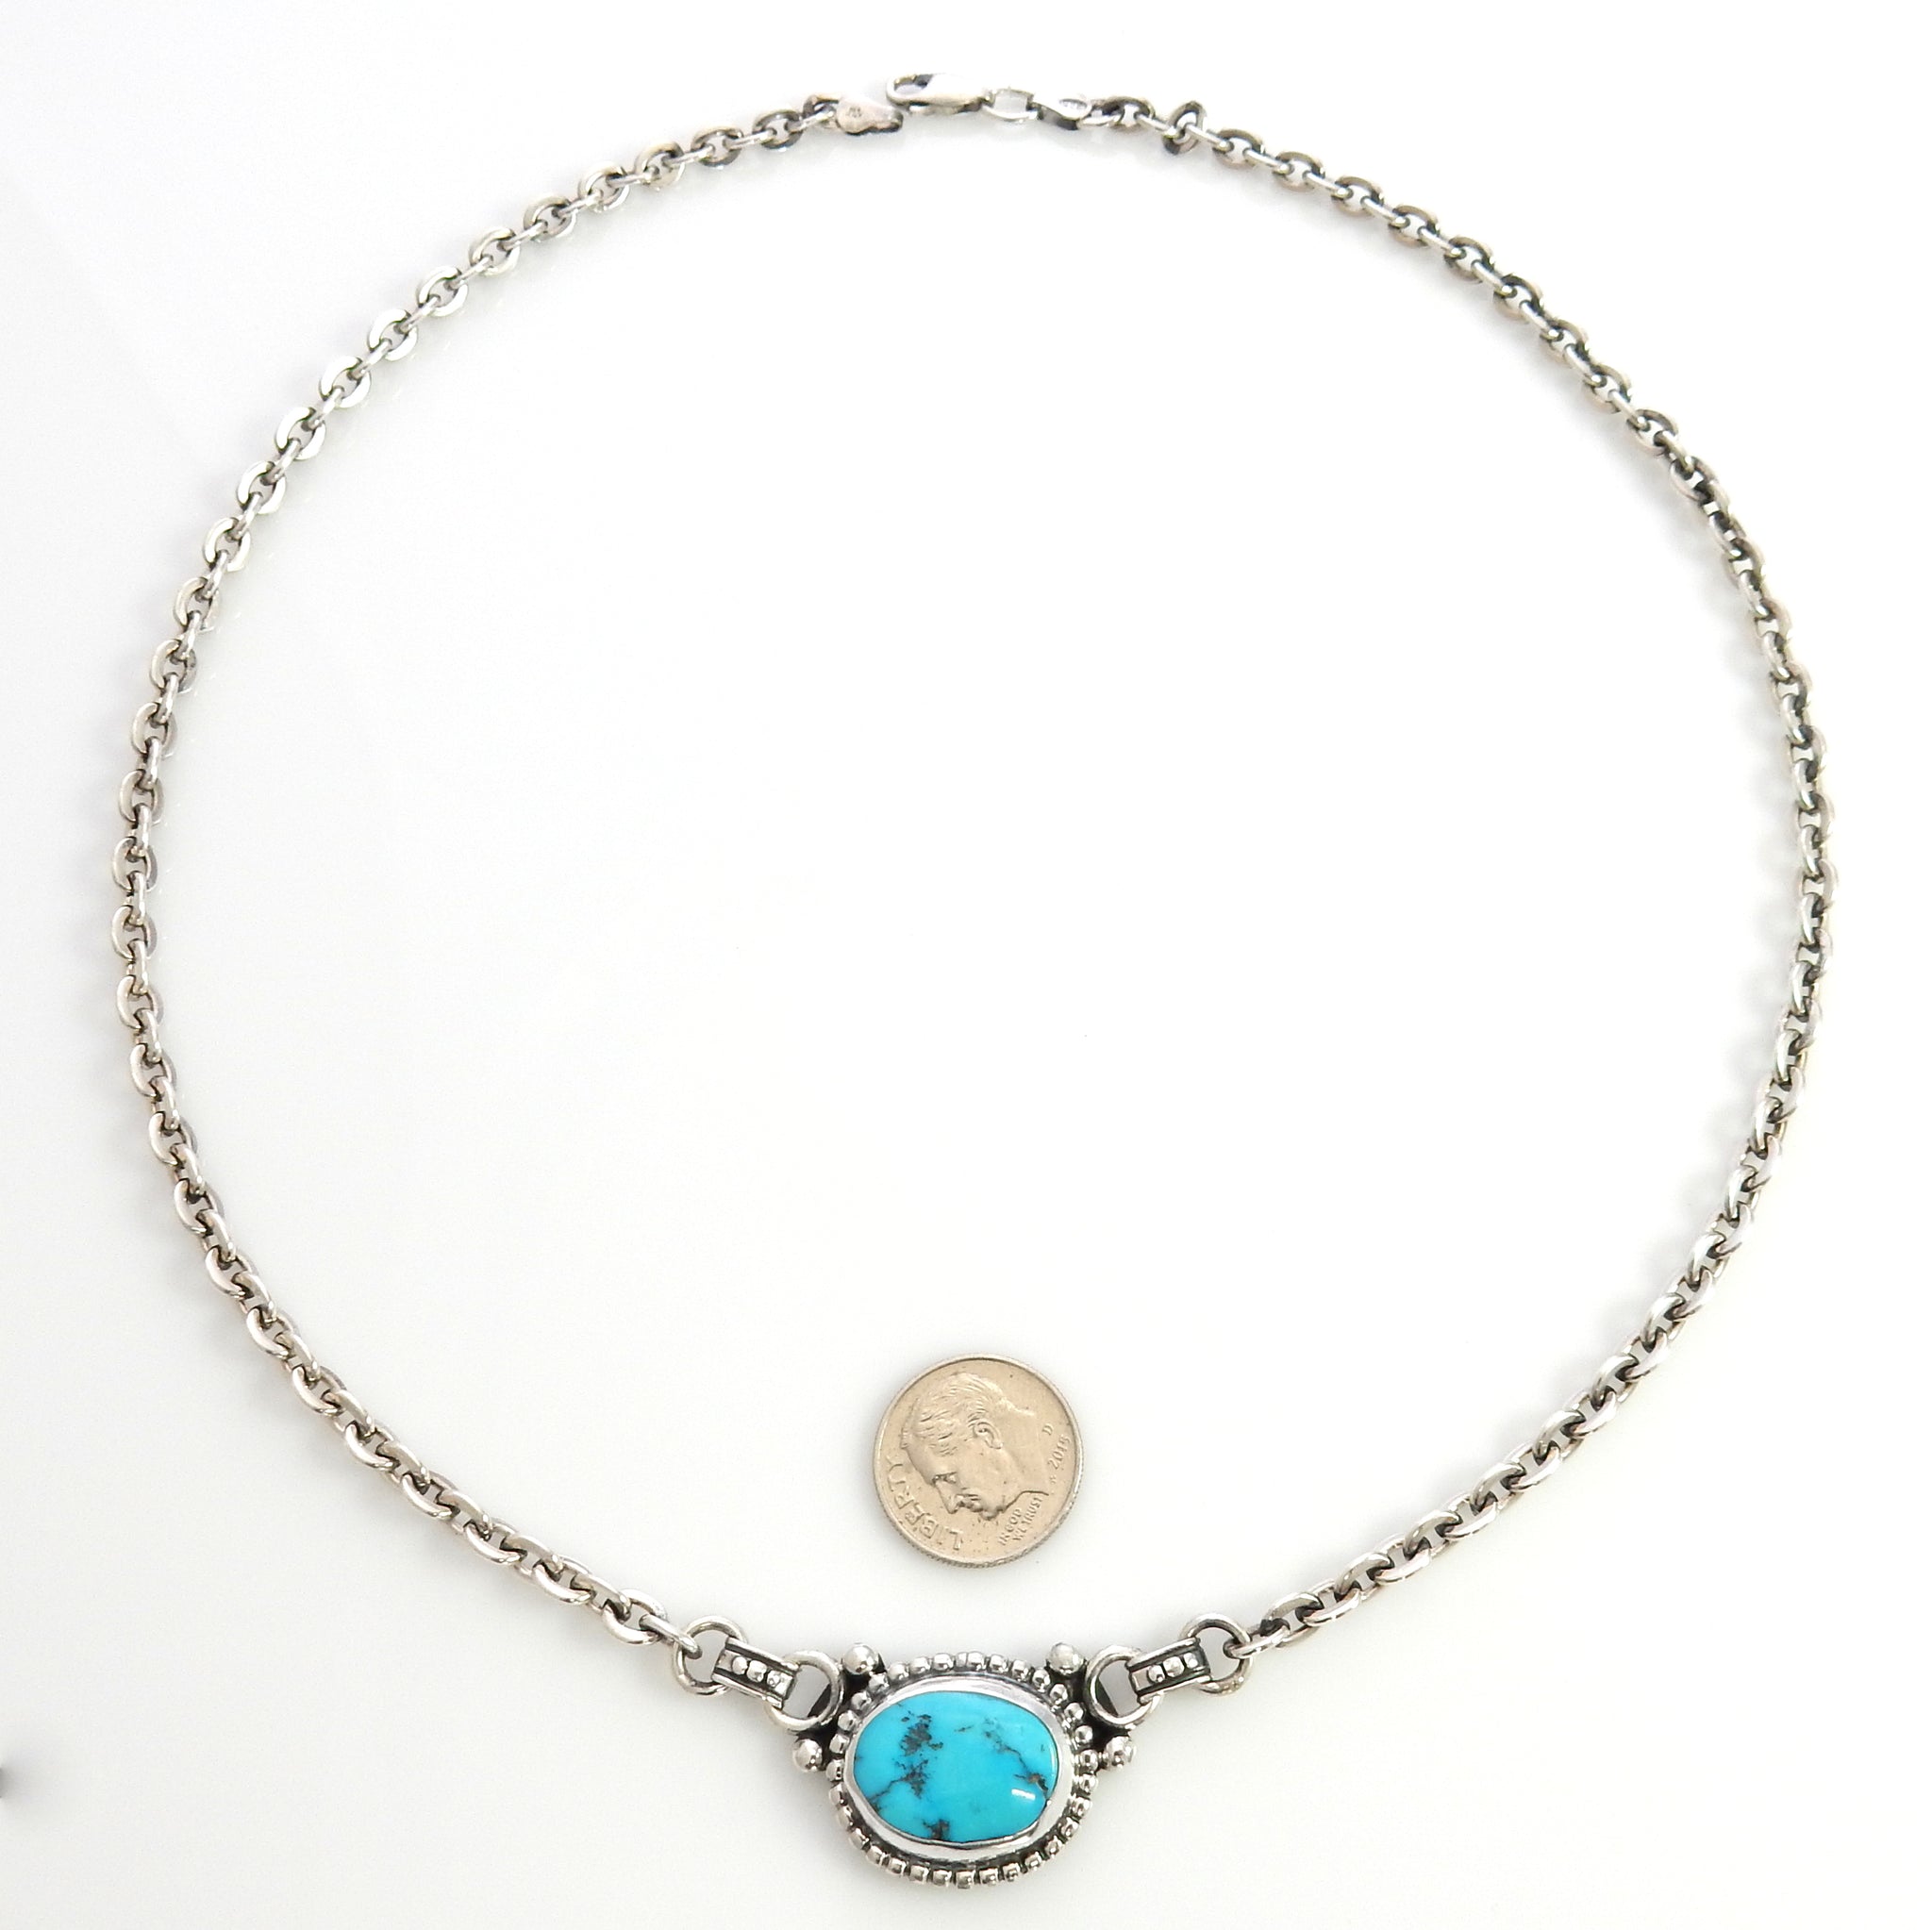 Beautiful 19 1/2" Inch Handmade Sterling Silver Blue Kingman Turquoise Necklace